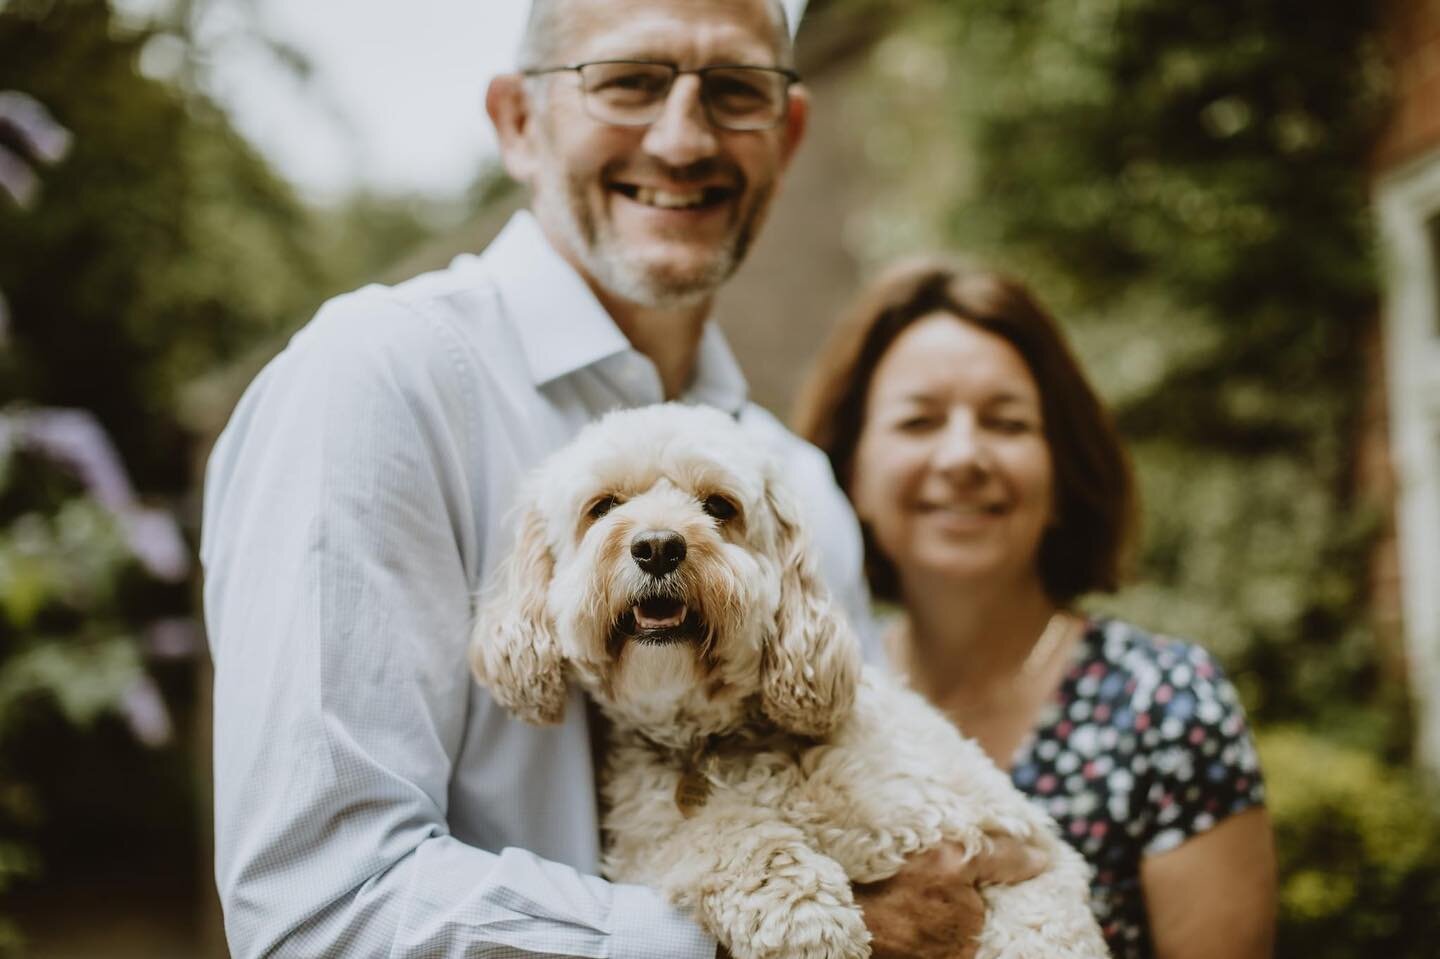 The star of the show @yeldersleyhall meet Nula with our owners Andrew + Catherine captured last summer by @chris.terry.photographer